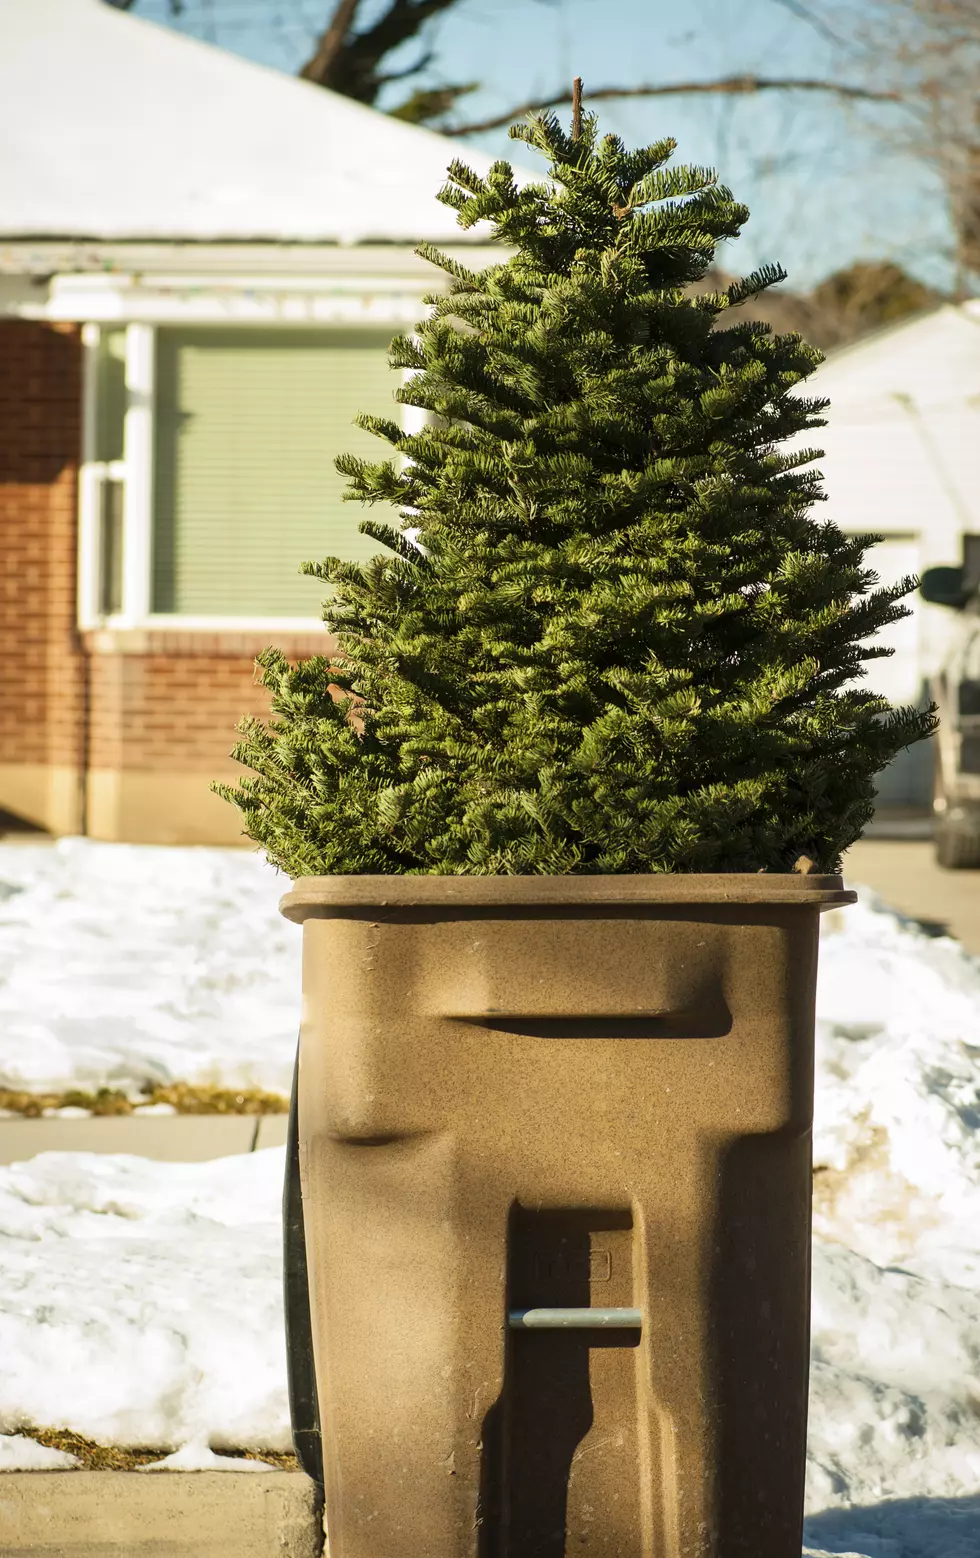 Is Taking Down Your Christmas Tree Bad Luck Before NYE?